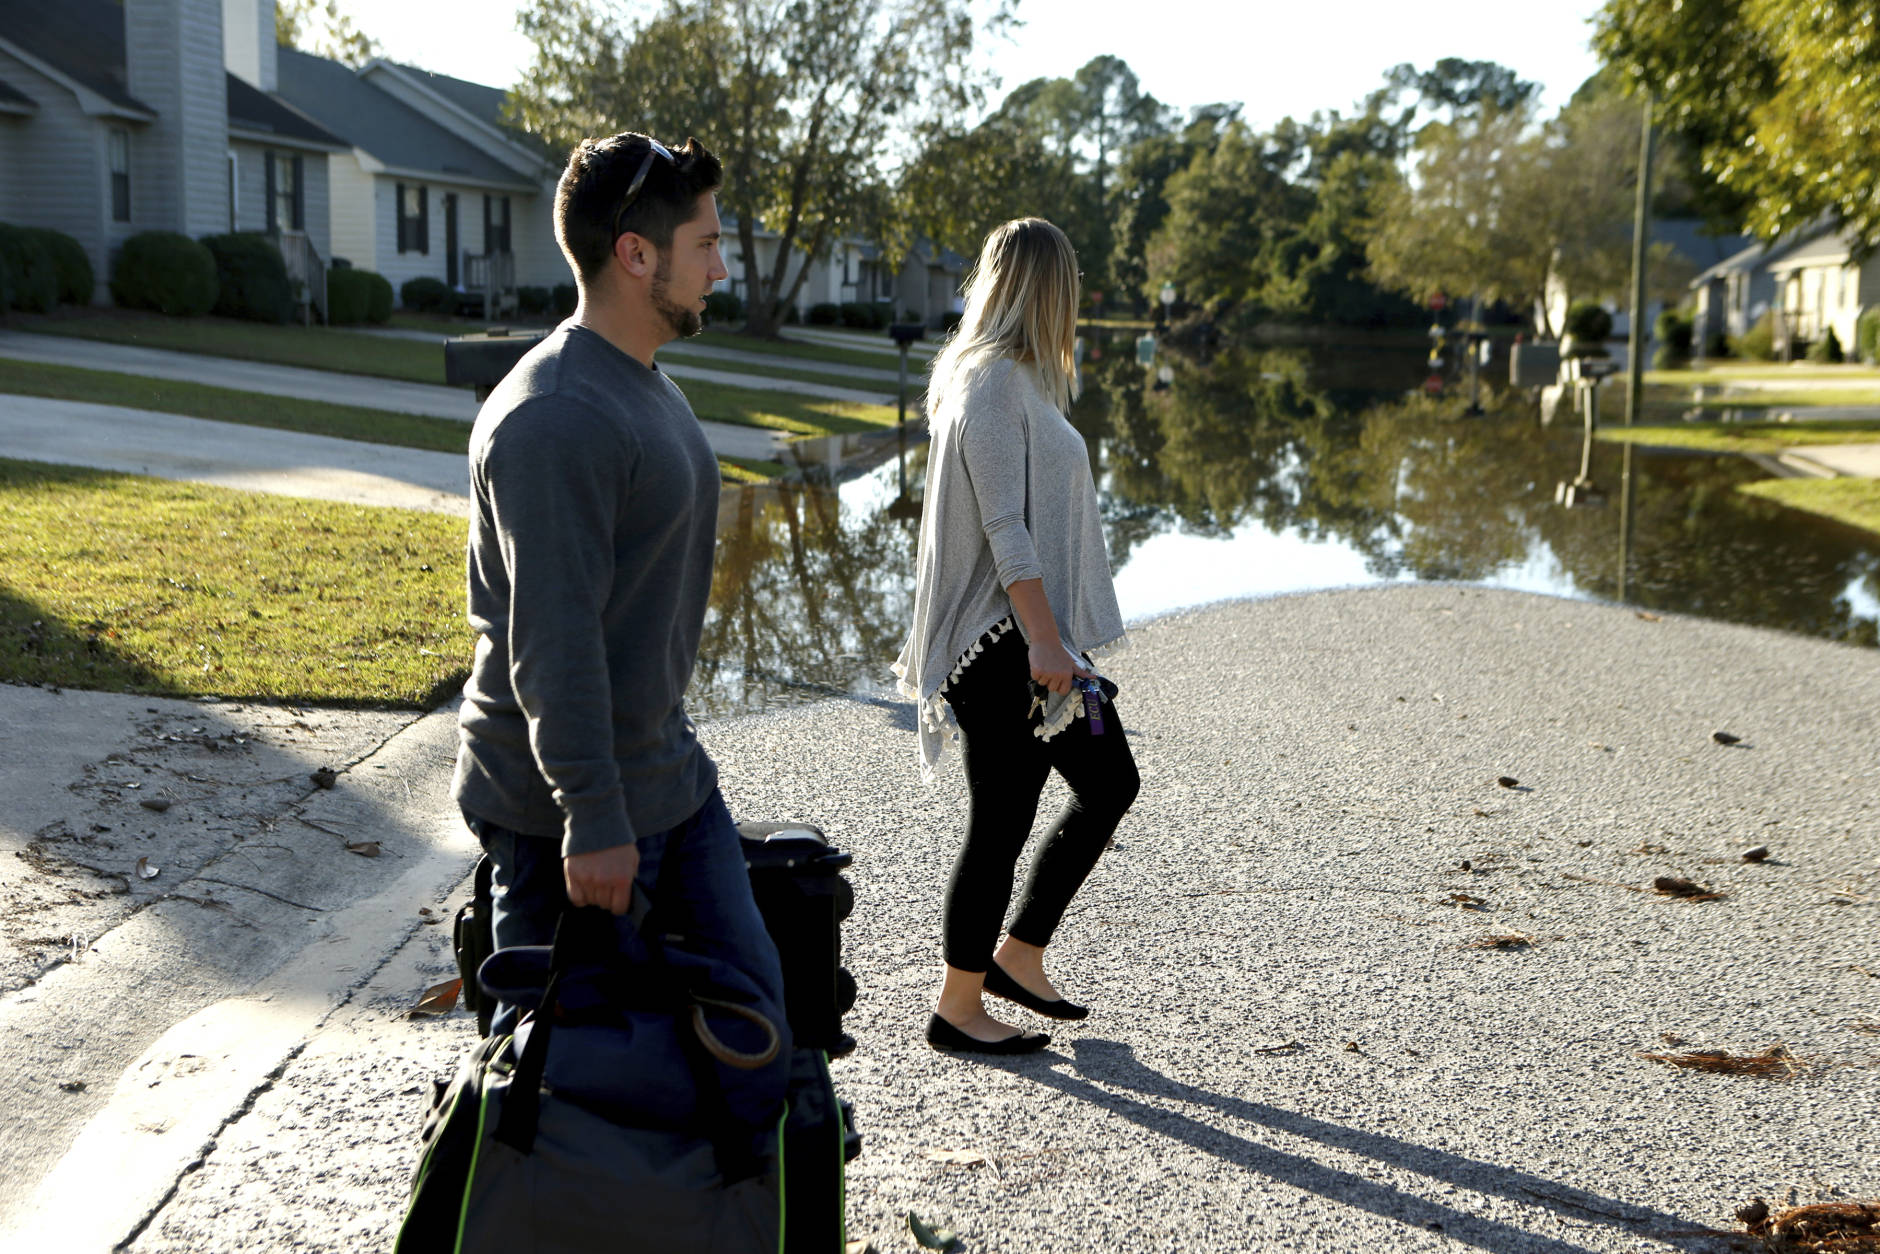 Collin Perry and Chelsea Blazer arrive from a vacation to find that, unlike several neighbors down the street, their home had not been impacted by floodwaters associated with Hurricane Matthew residents inspect flooding along the Tar River, Wednesday, Oct. 12, 2016, in Greenville, N.C. (AP Photo/Brian Blanco)